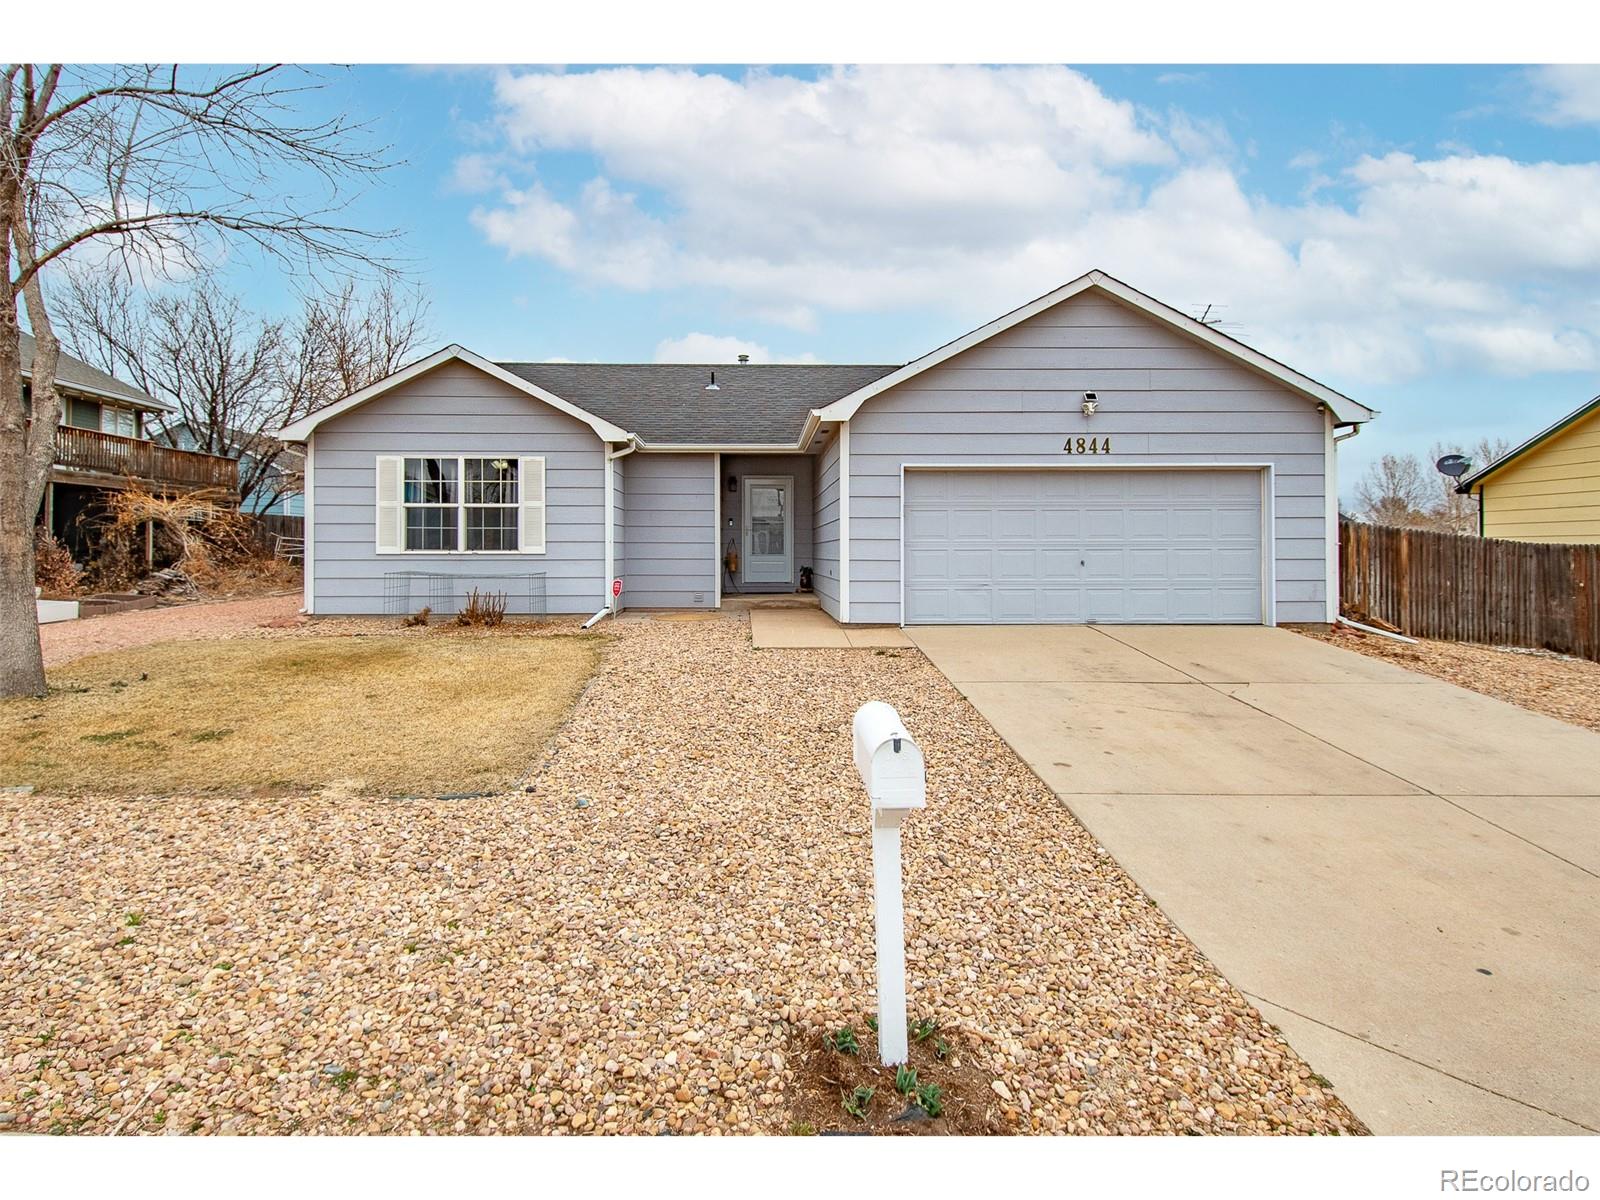 4844  kings canyon drive, Greeley sold home. Closed on 2024-04-11 for $400,000.